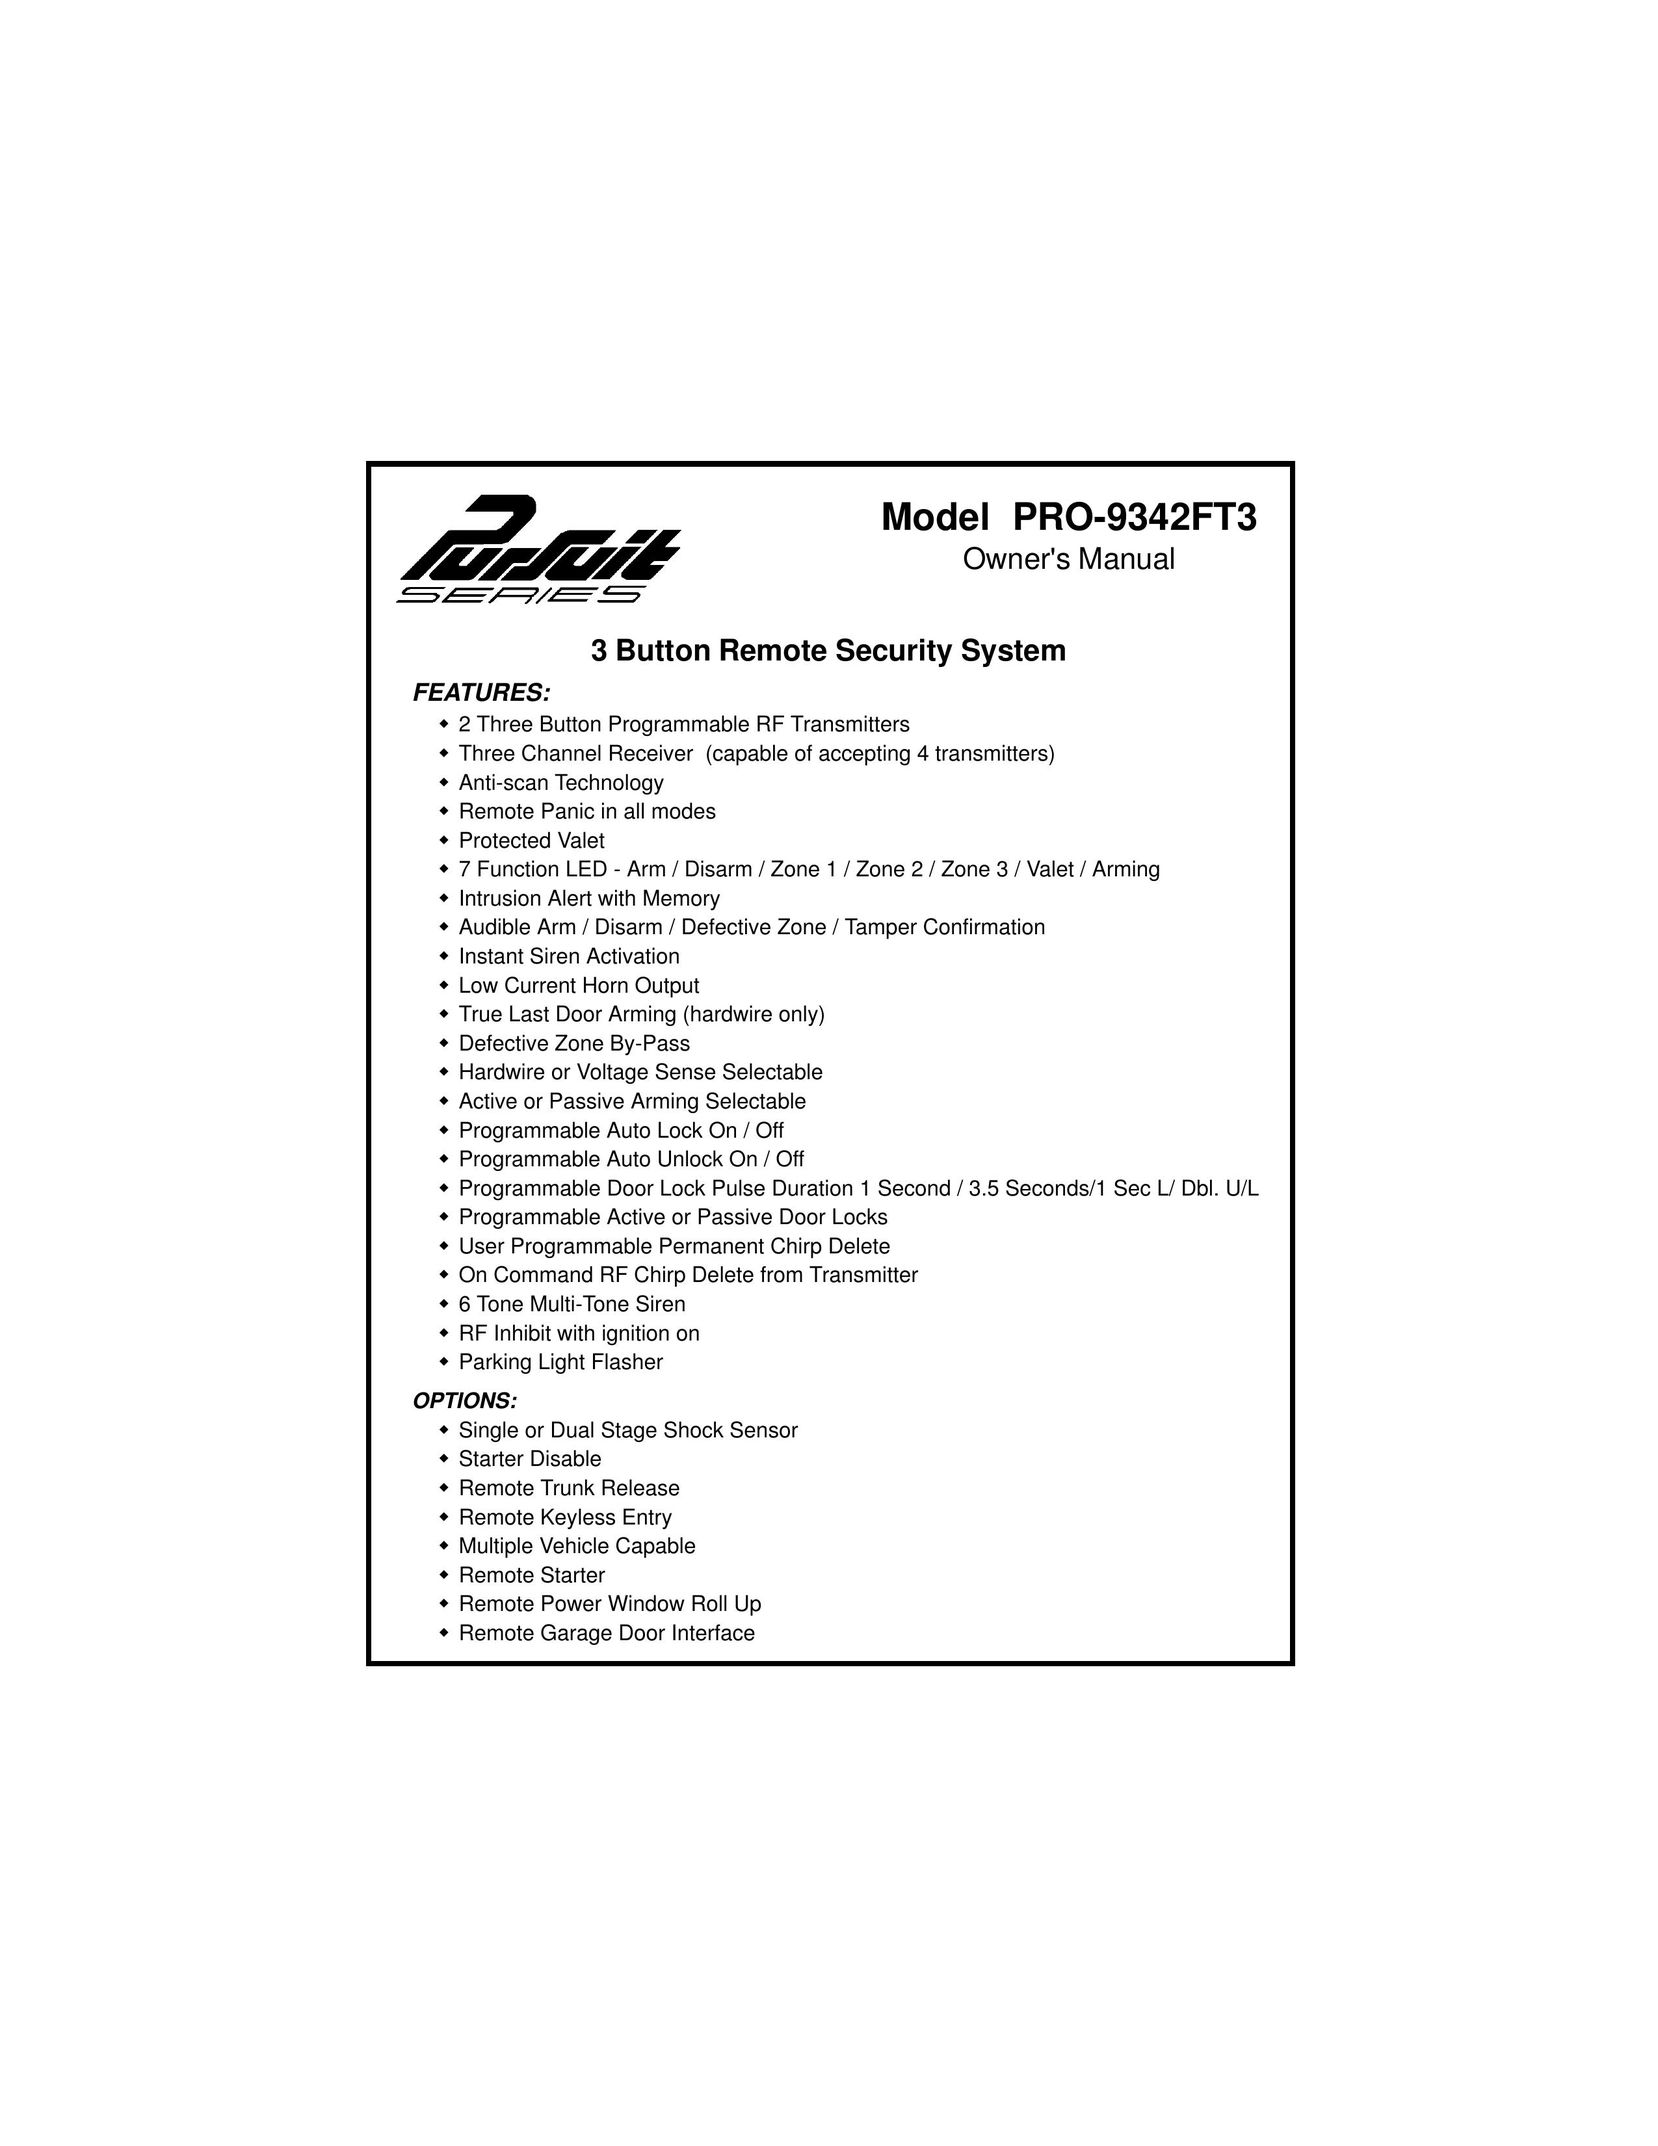 Audiovox PRO-9342FT3 Home Security System User Manual